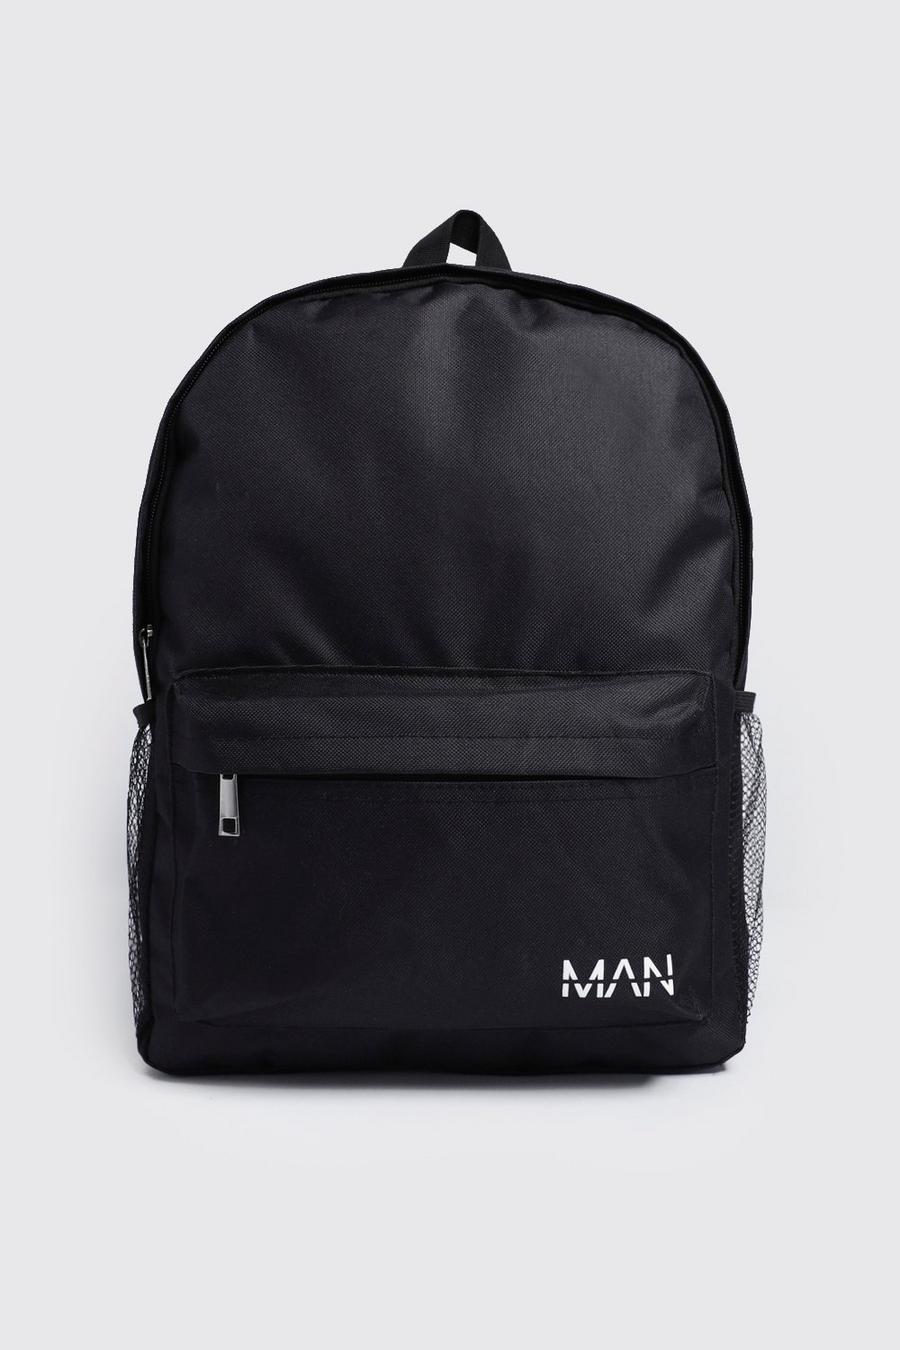 Black Nylon Backpack With MAN Print image number 1